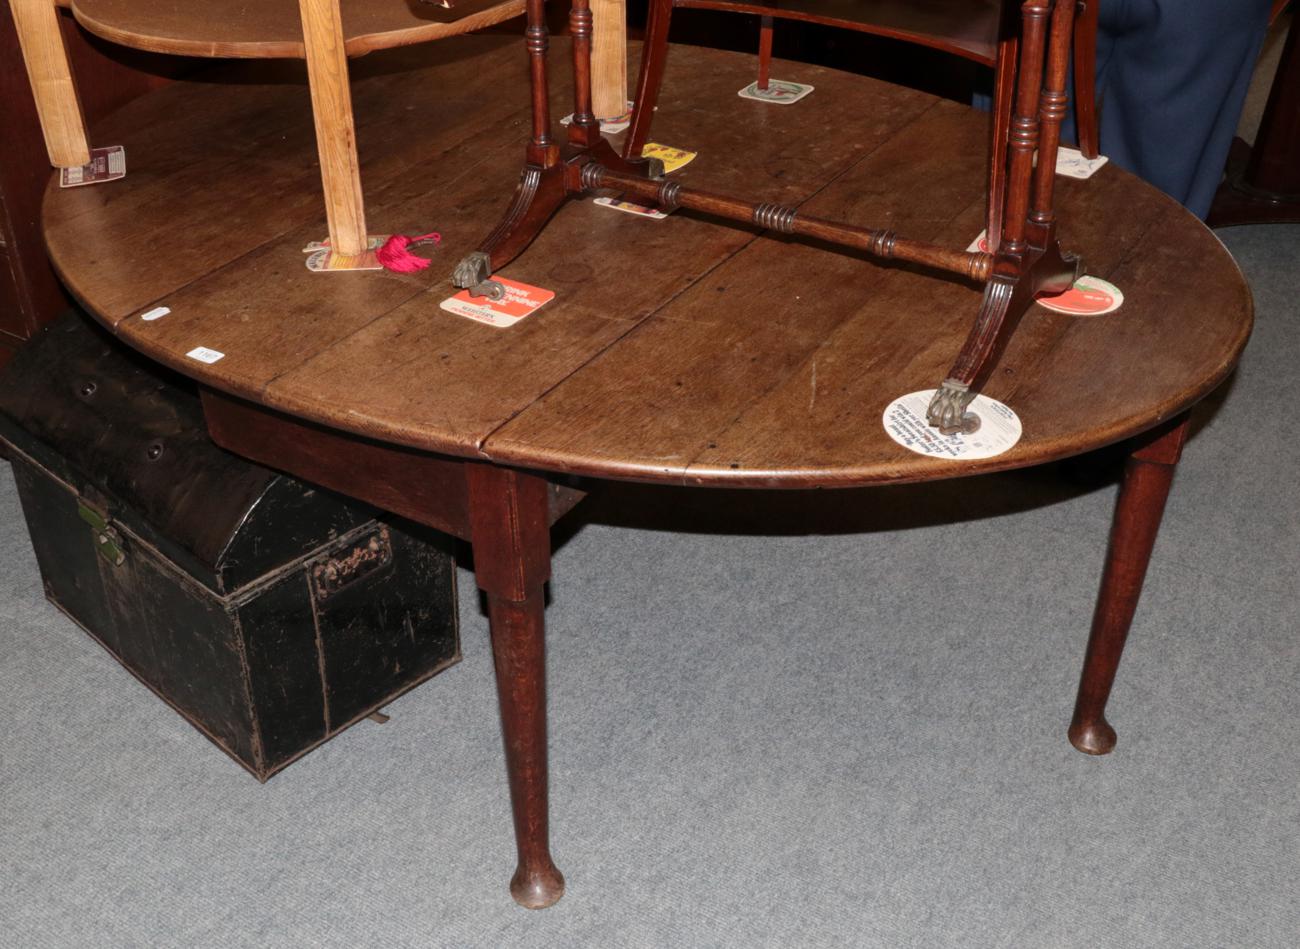 Lot 1167 - An 18th century pad foot dining table